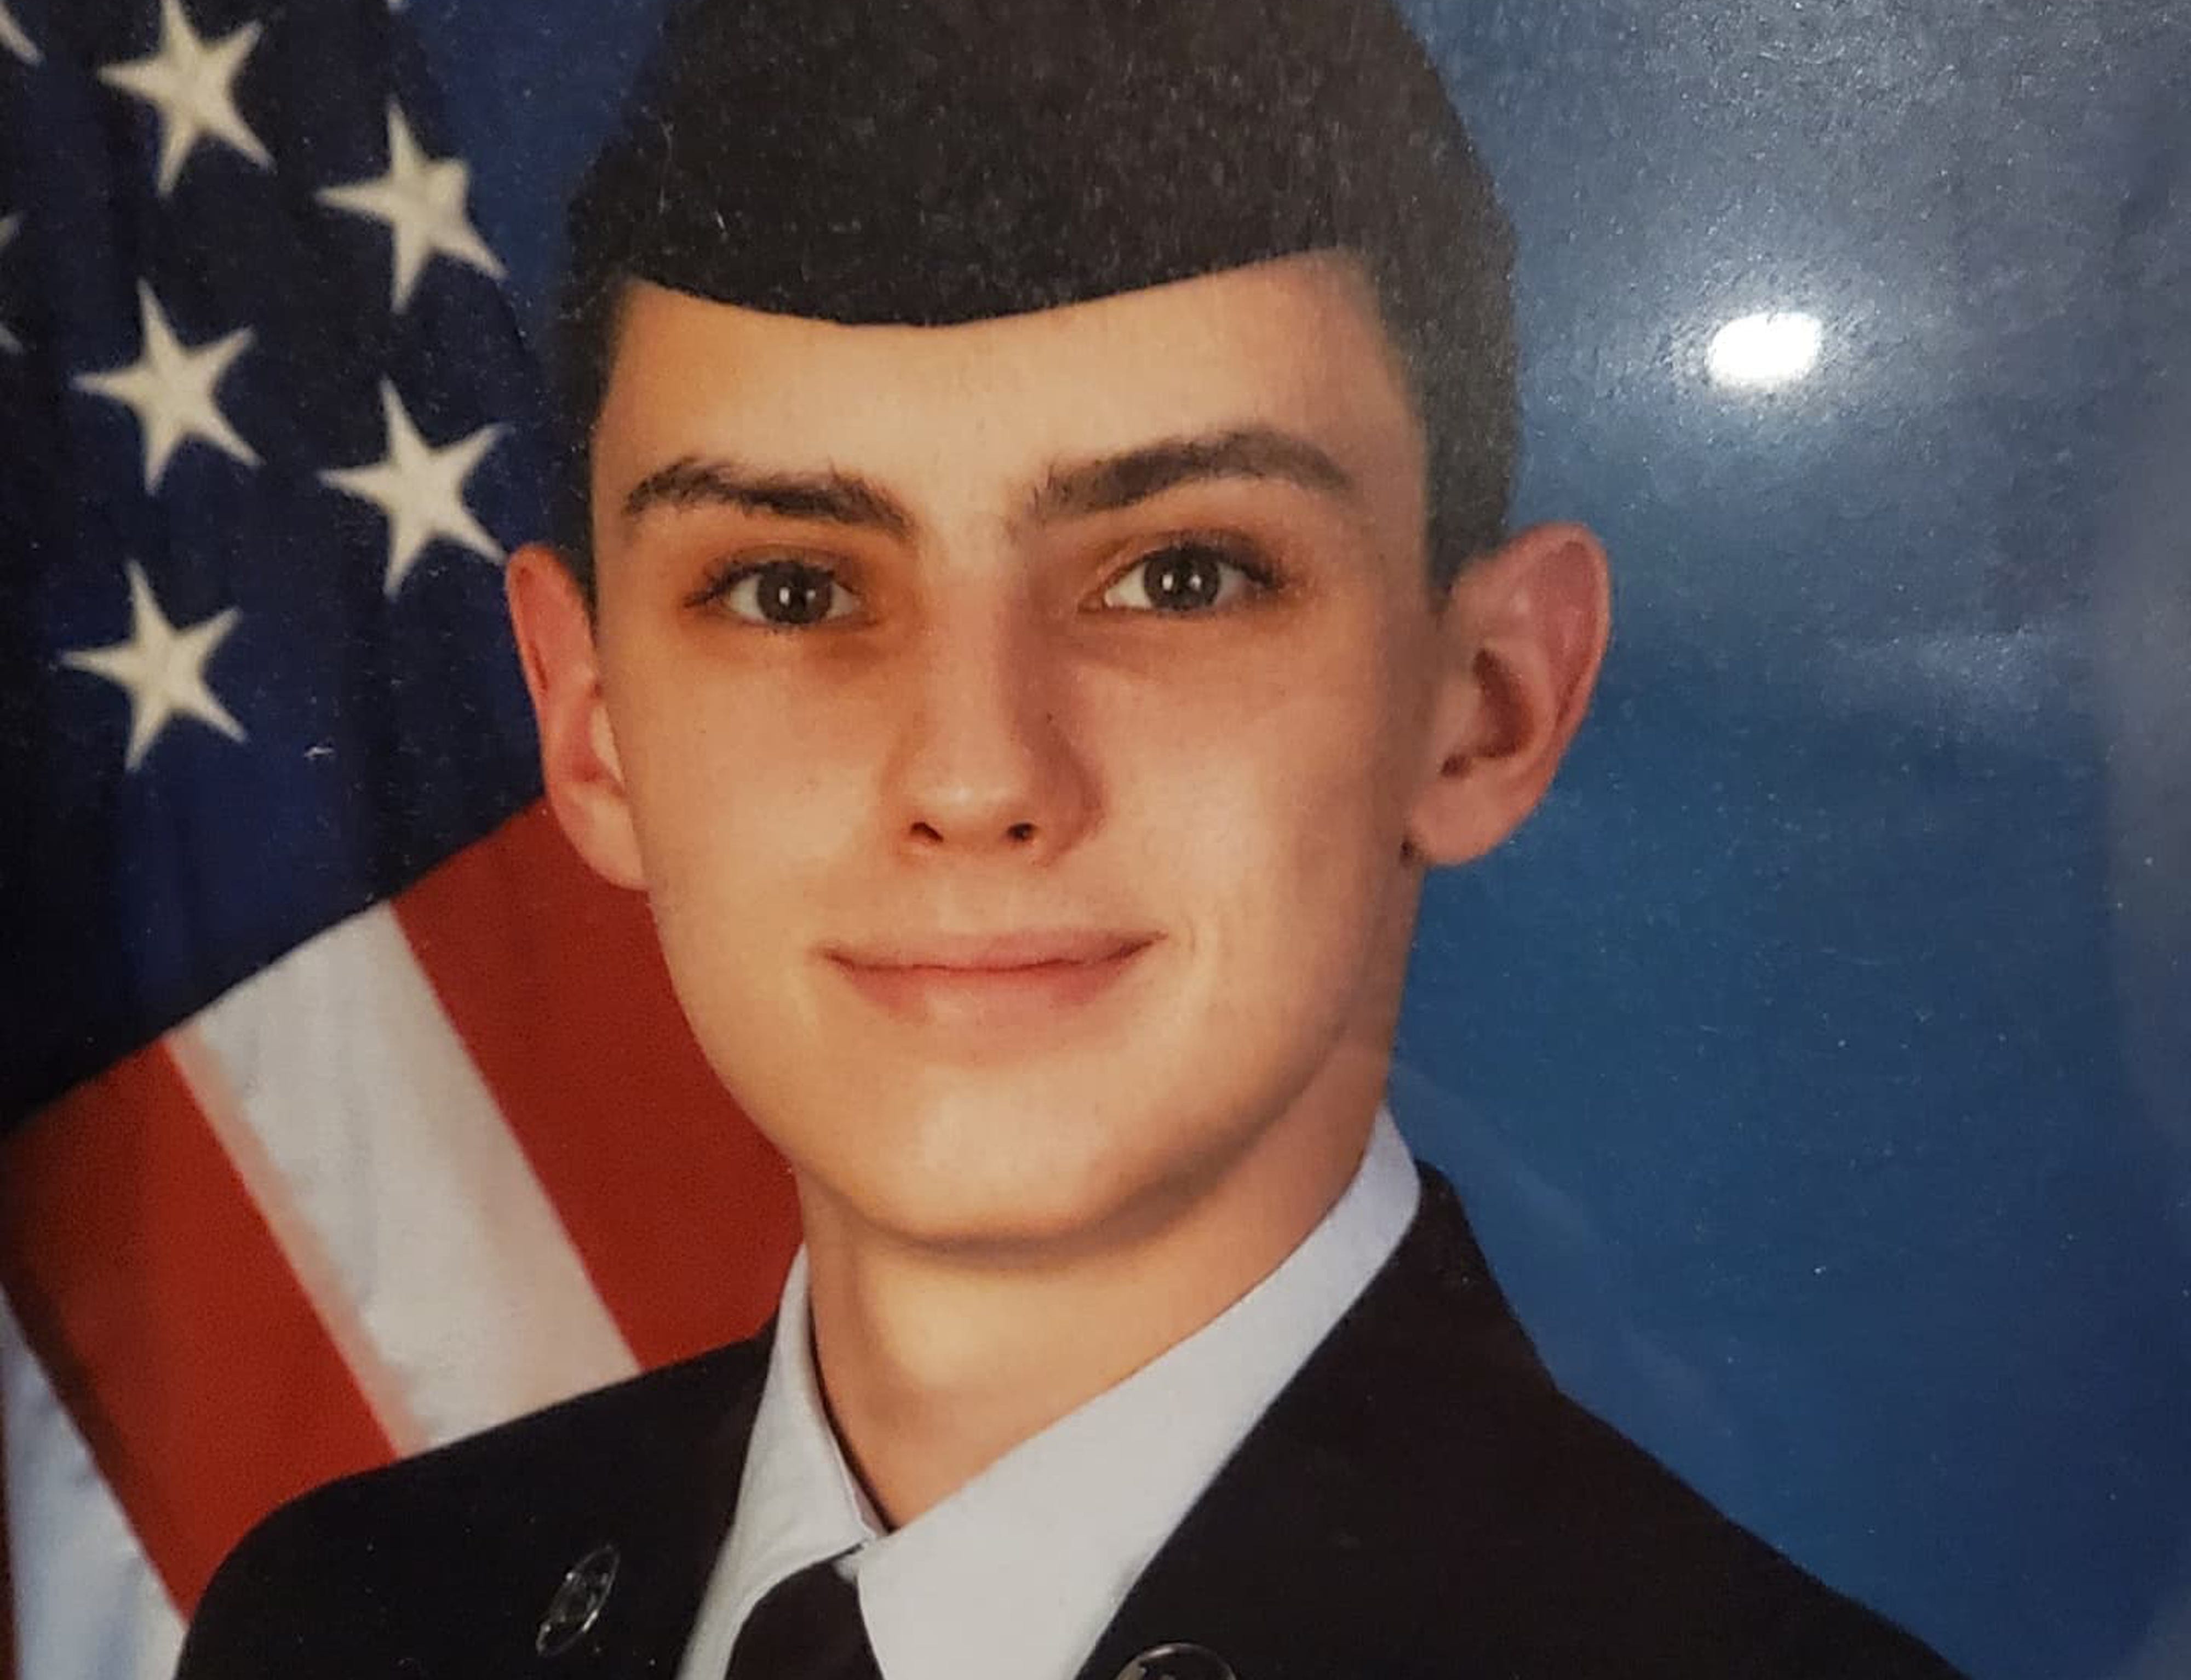 How a 21-Year-Old Edgelord Stole Pentagon Secrets